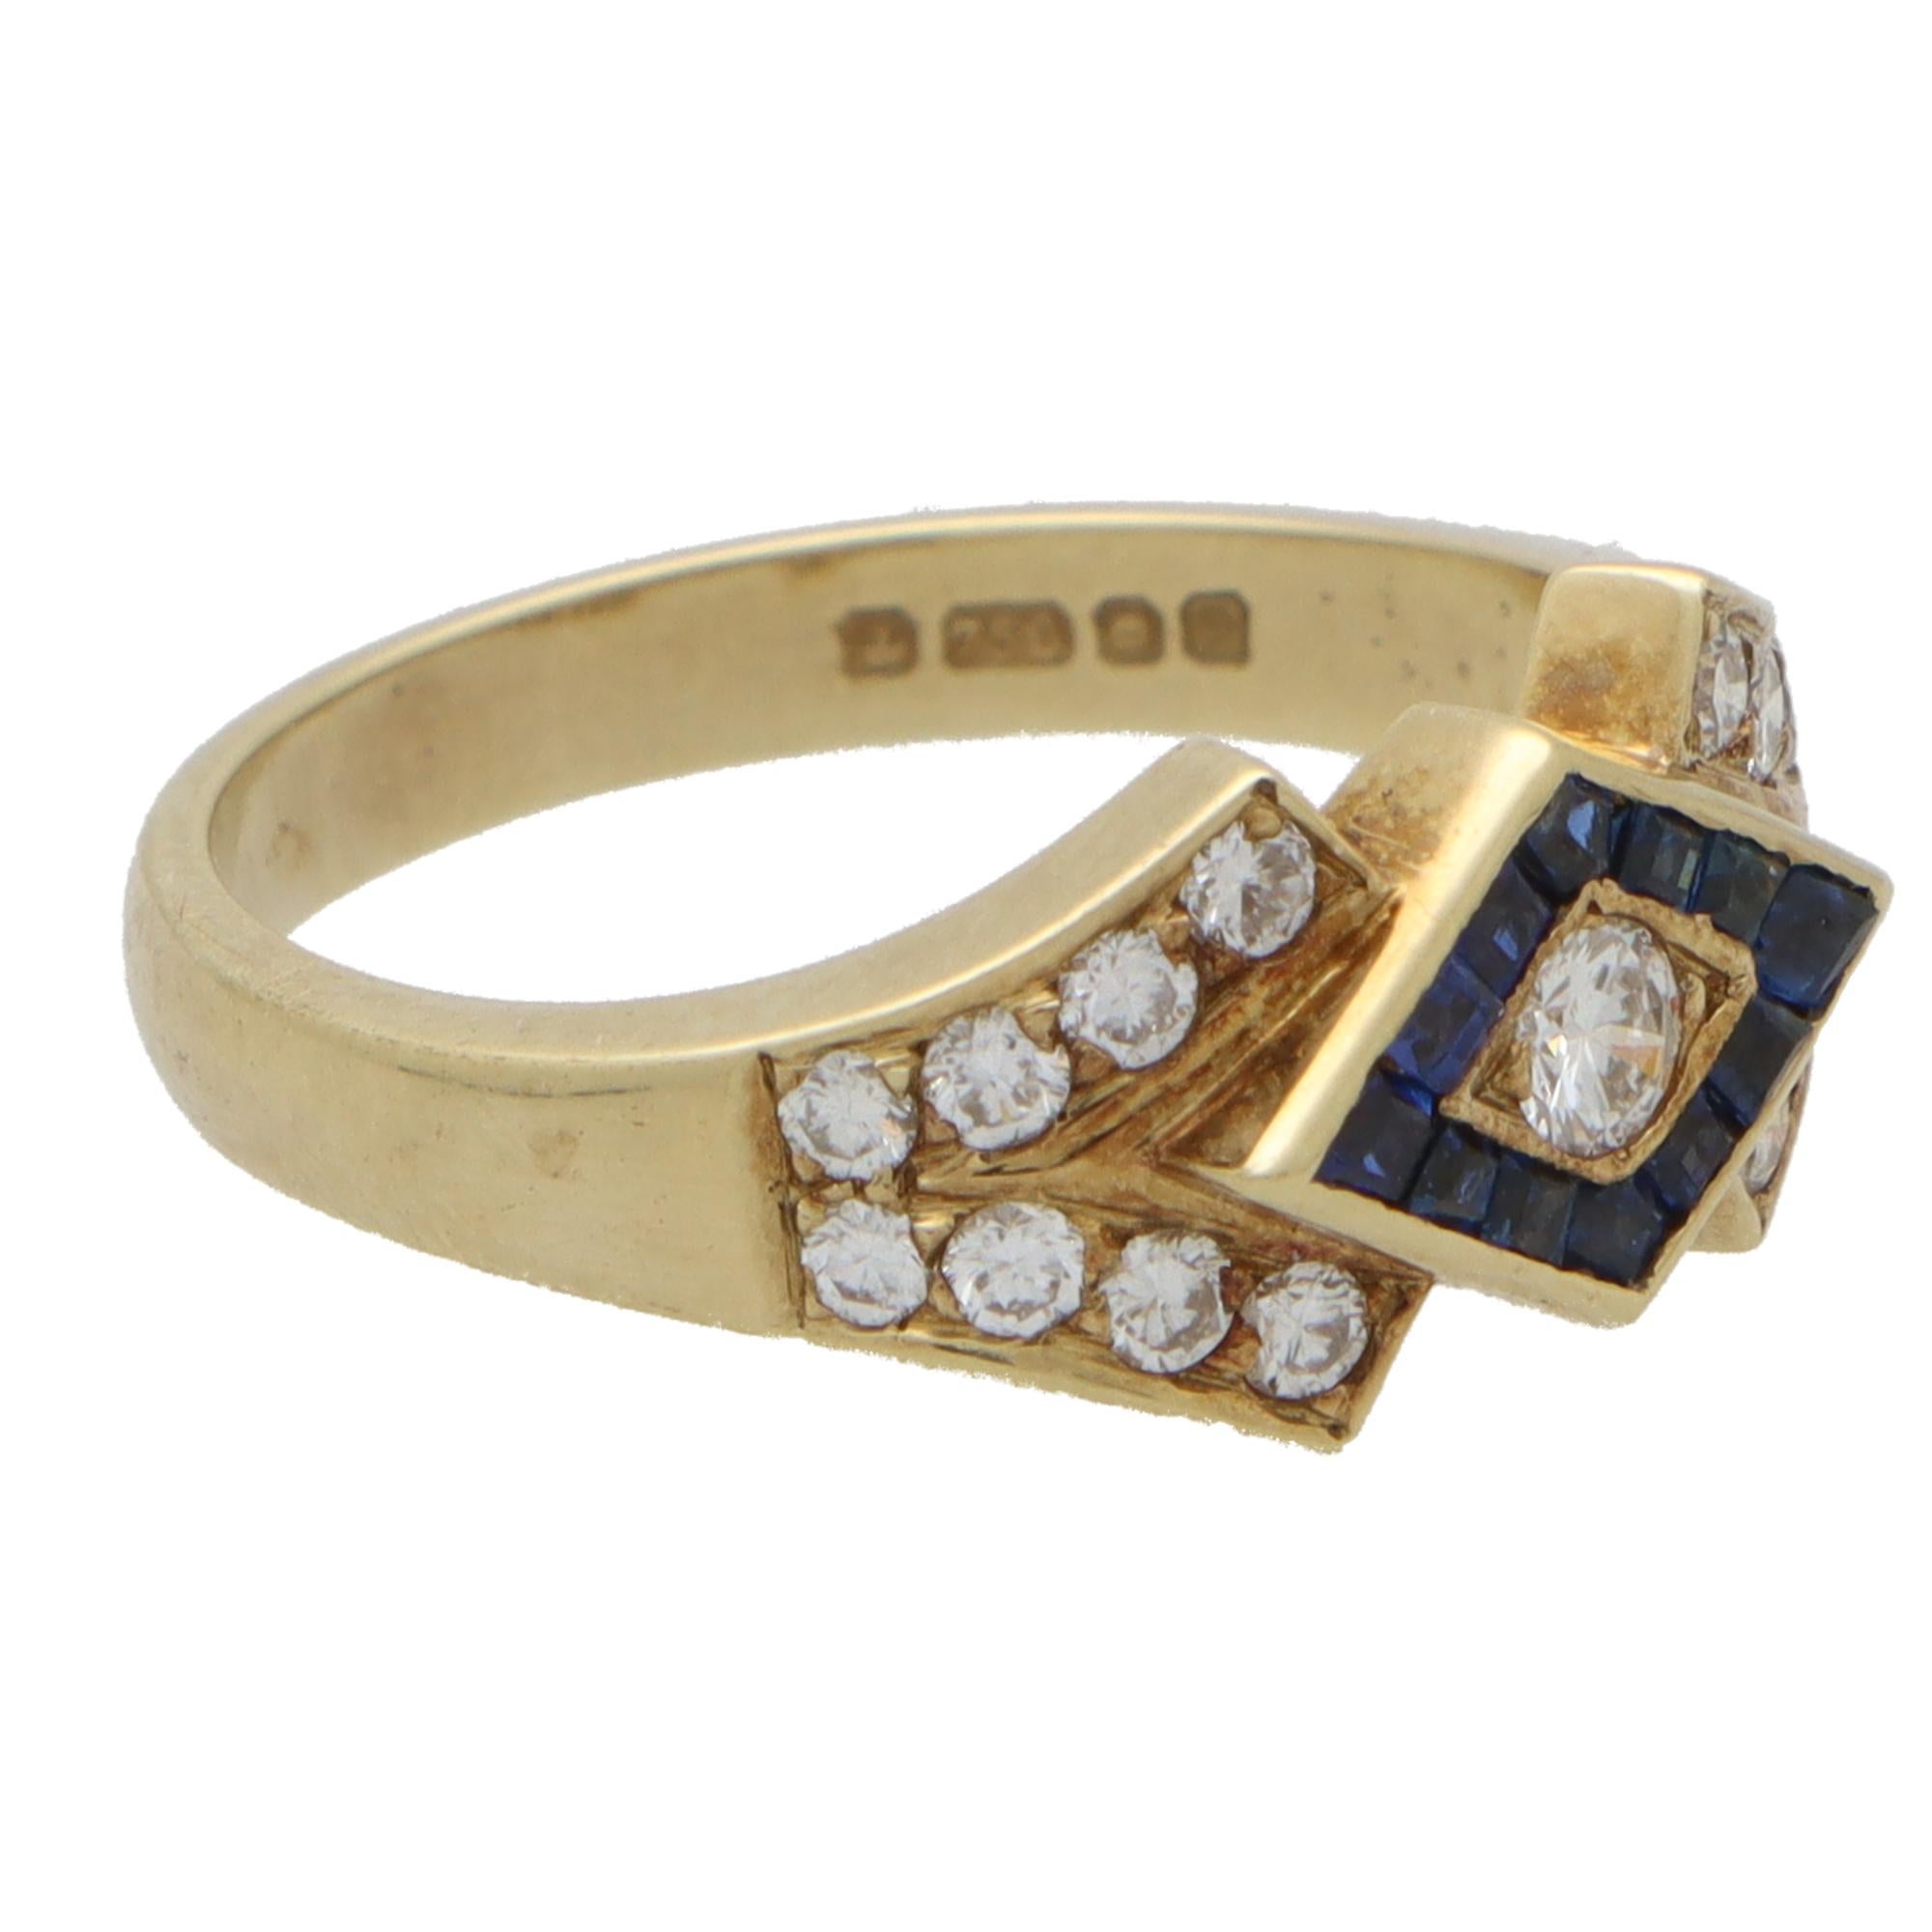 Round Cut Contemporary Sapphire and Diamond Dress Ring Set in 18k Yellow Gold